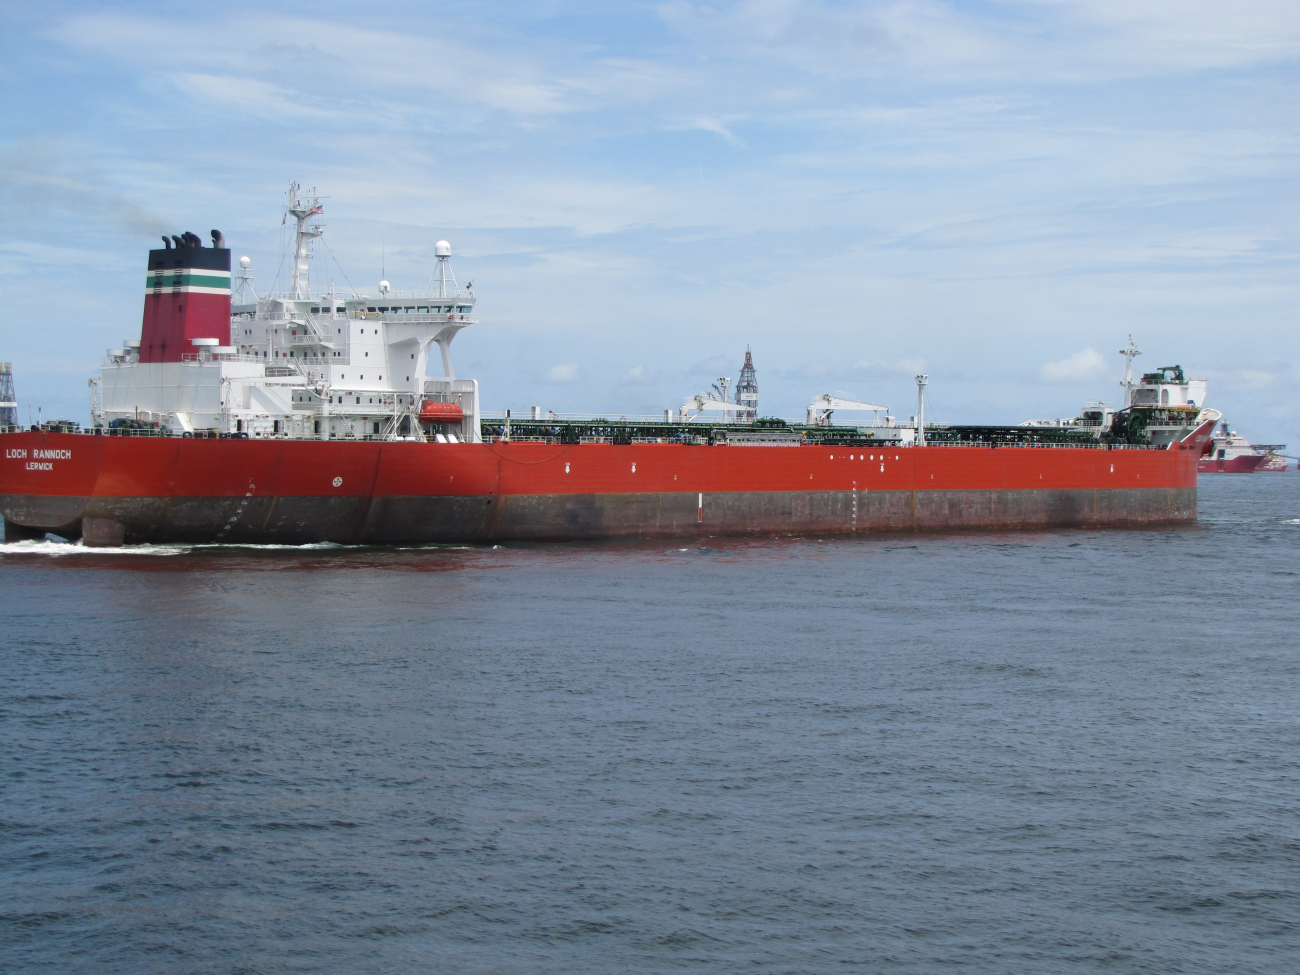 Tanker  LOCH RANNOCH on-site at the Deepwater Horizon disasterduring well containment andcleanup efforts